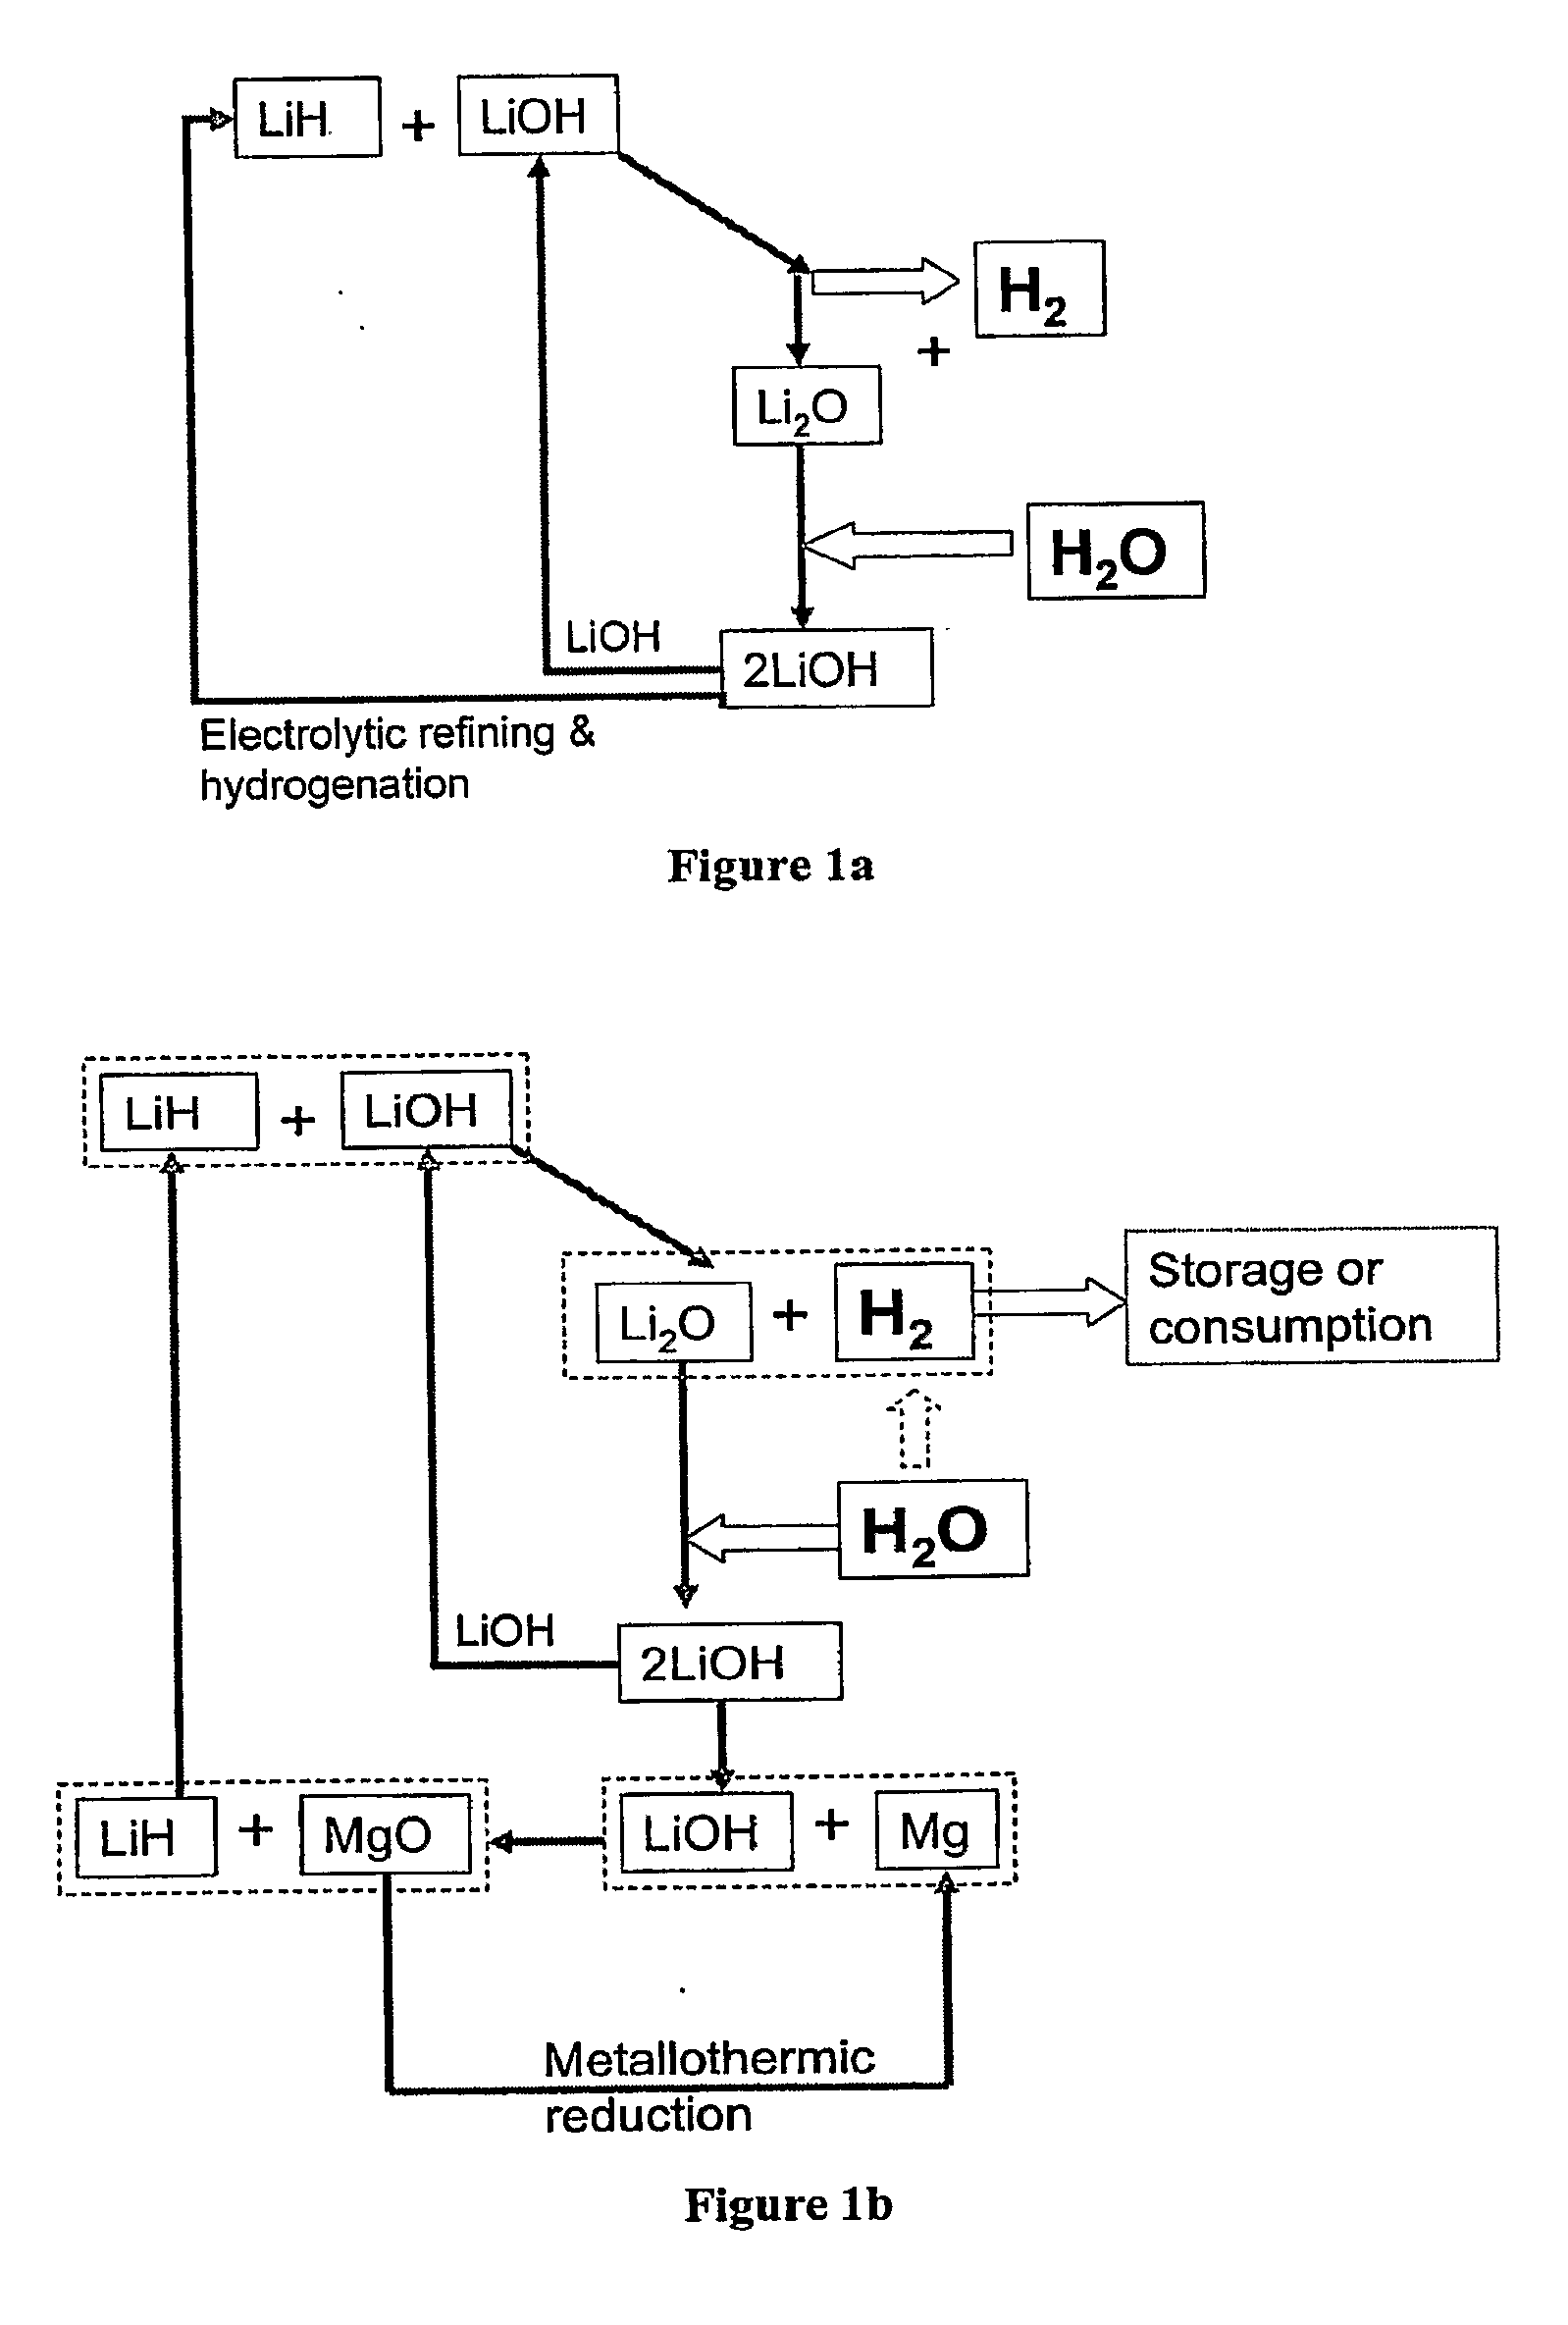 Systems and Methods for Hydrogen Storage and Generation from Water Using Lithium Based Materials